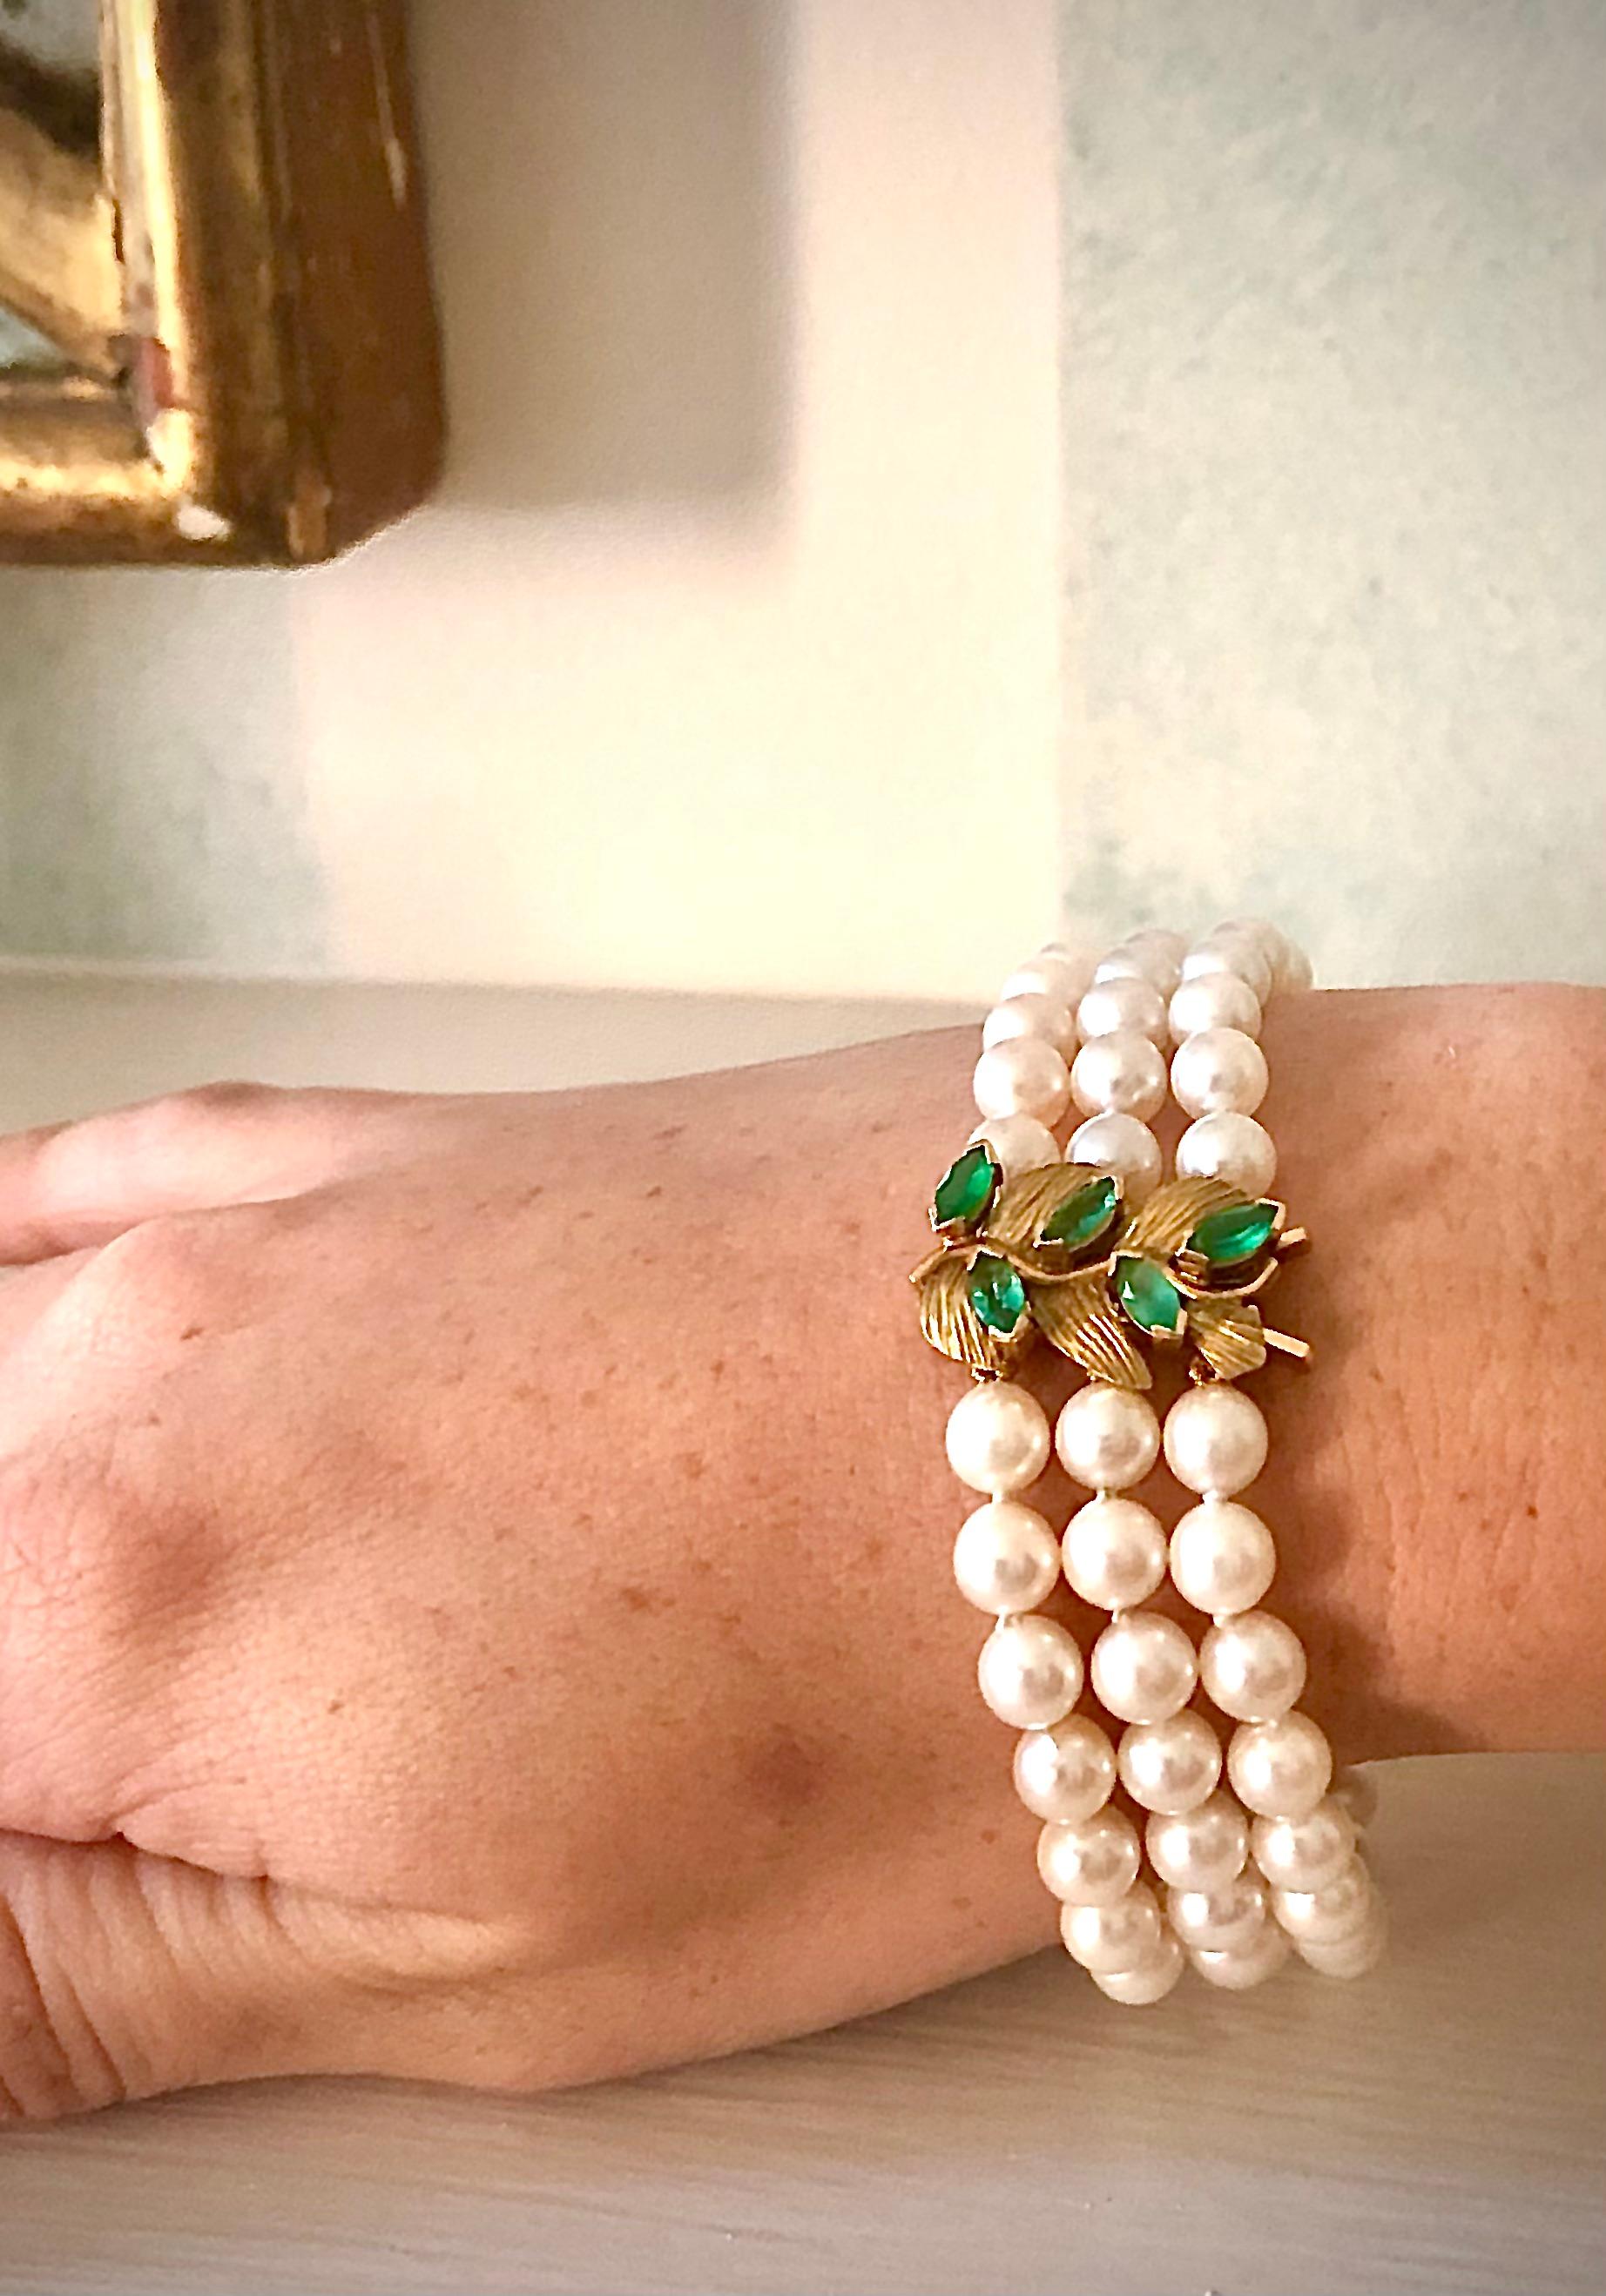 Beautiful, substantial bracelet with three rows of exceptionally lustrous nice round high quality cultured pearls. The pearls average 6.35mm in diameter. There are two relatively heavy gold divider bars.

The clasp is very nicely crafted with matte